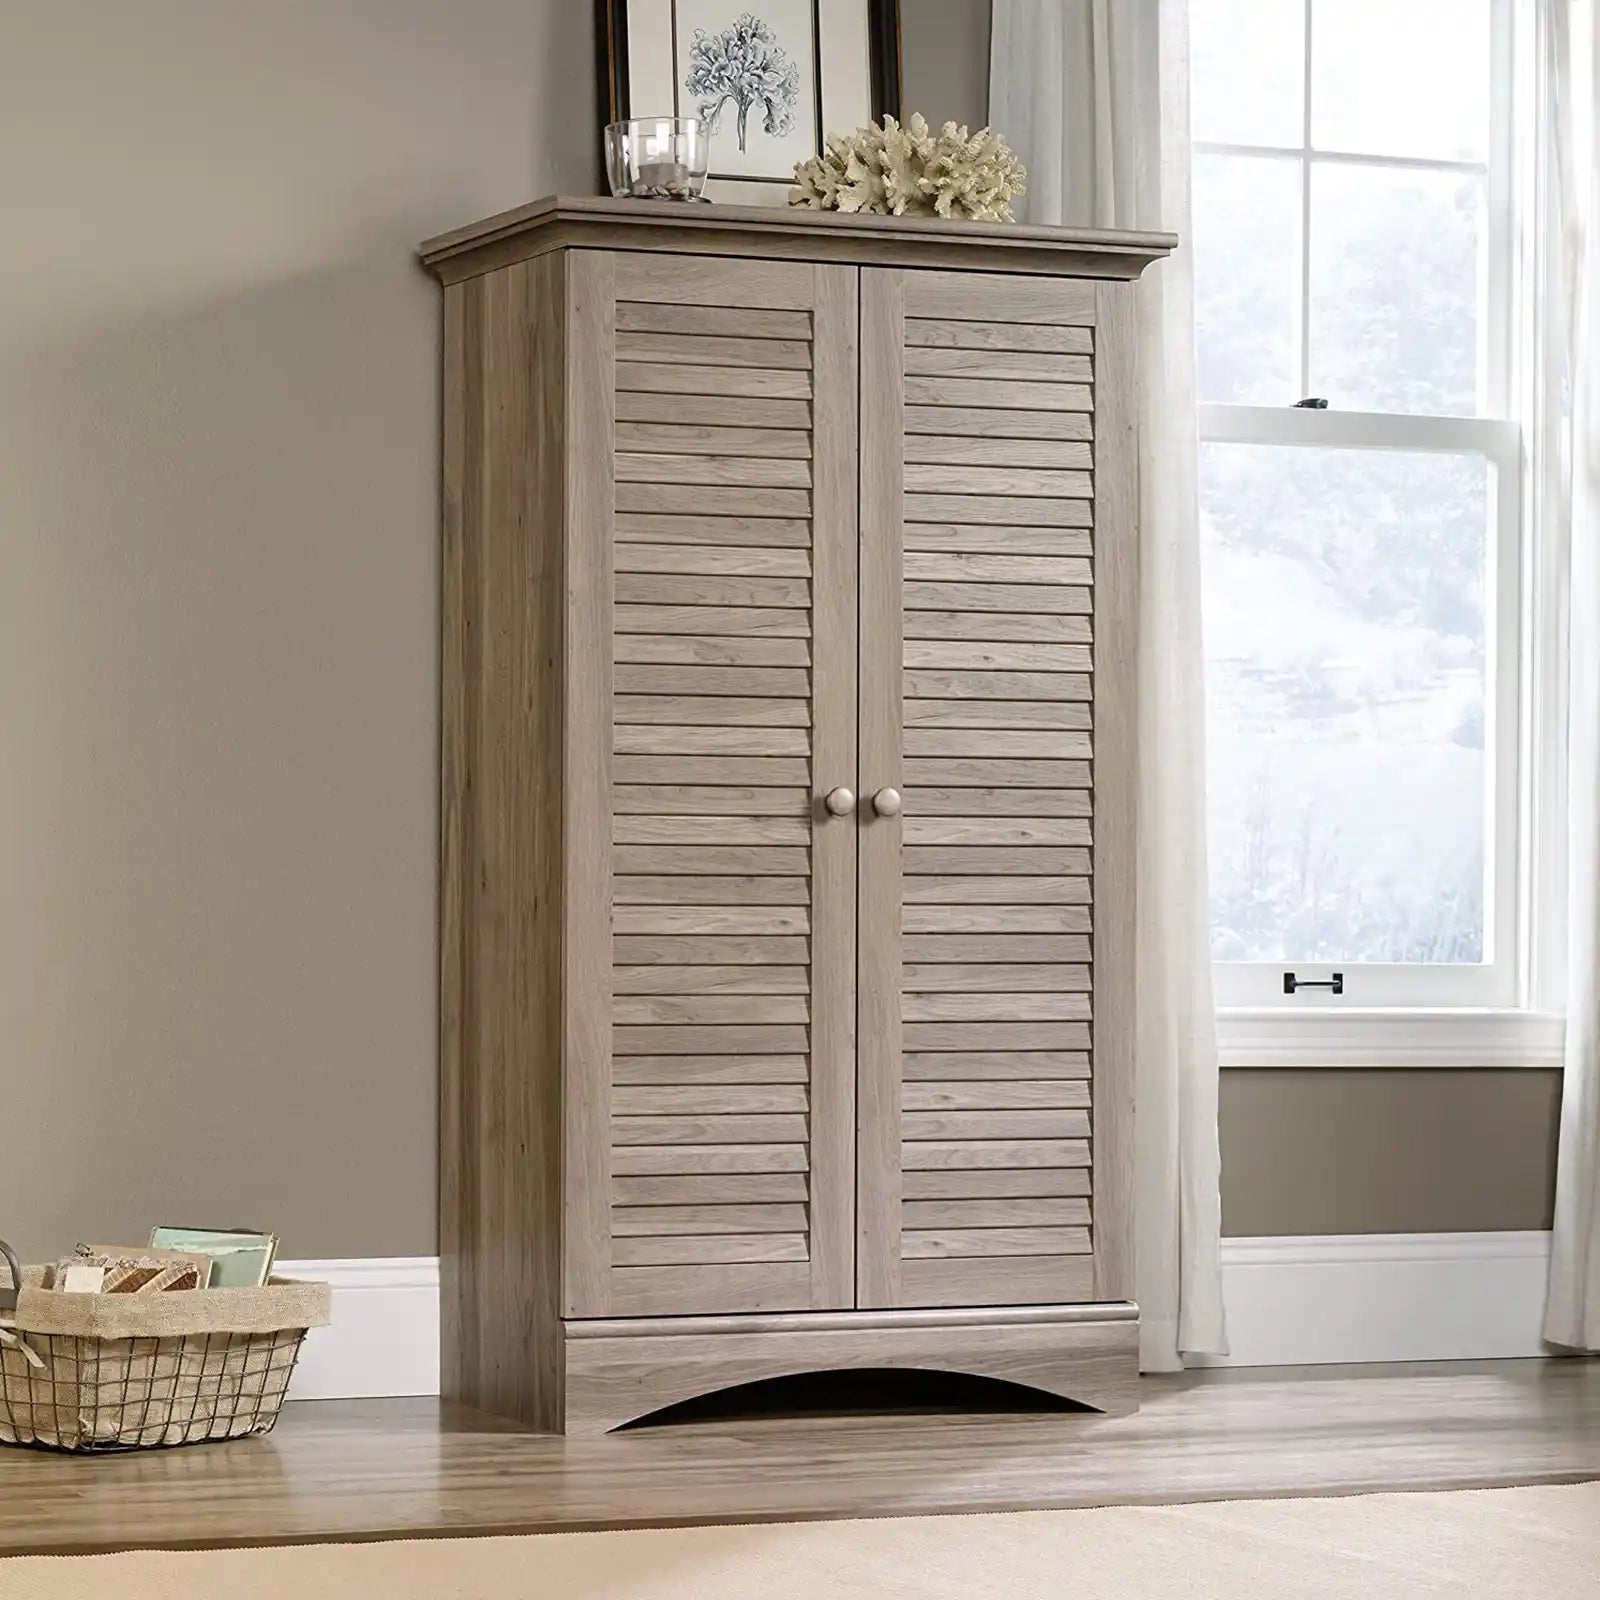 Contemporary Storage Wardrobes and Cabinet